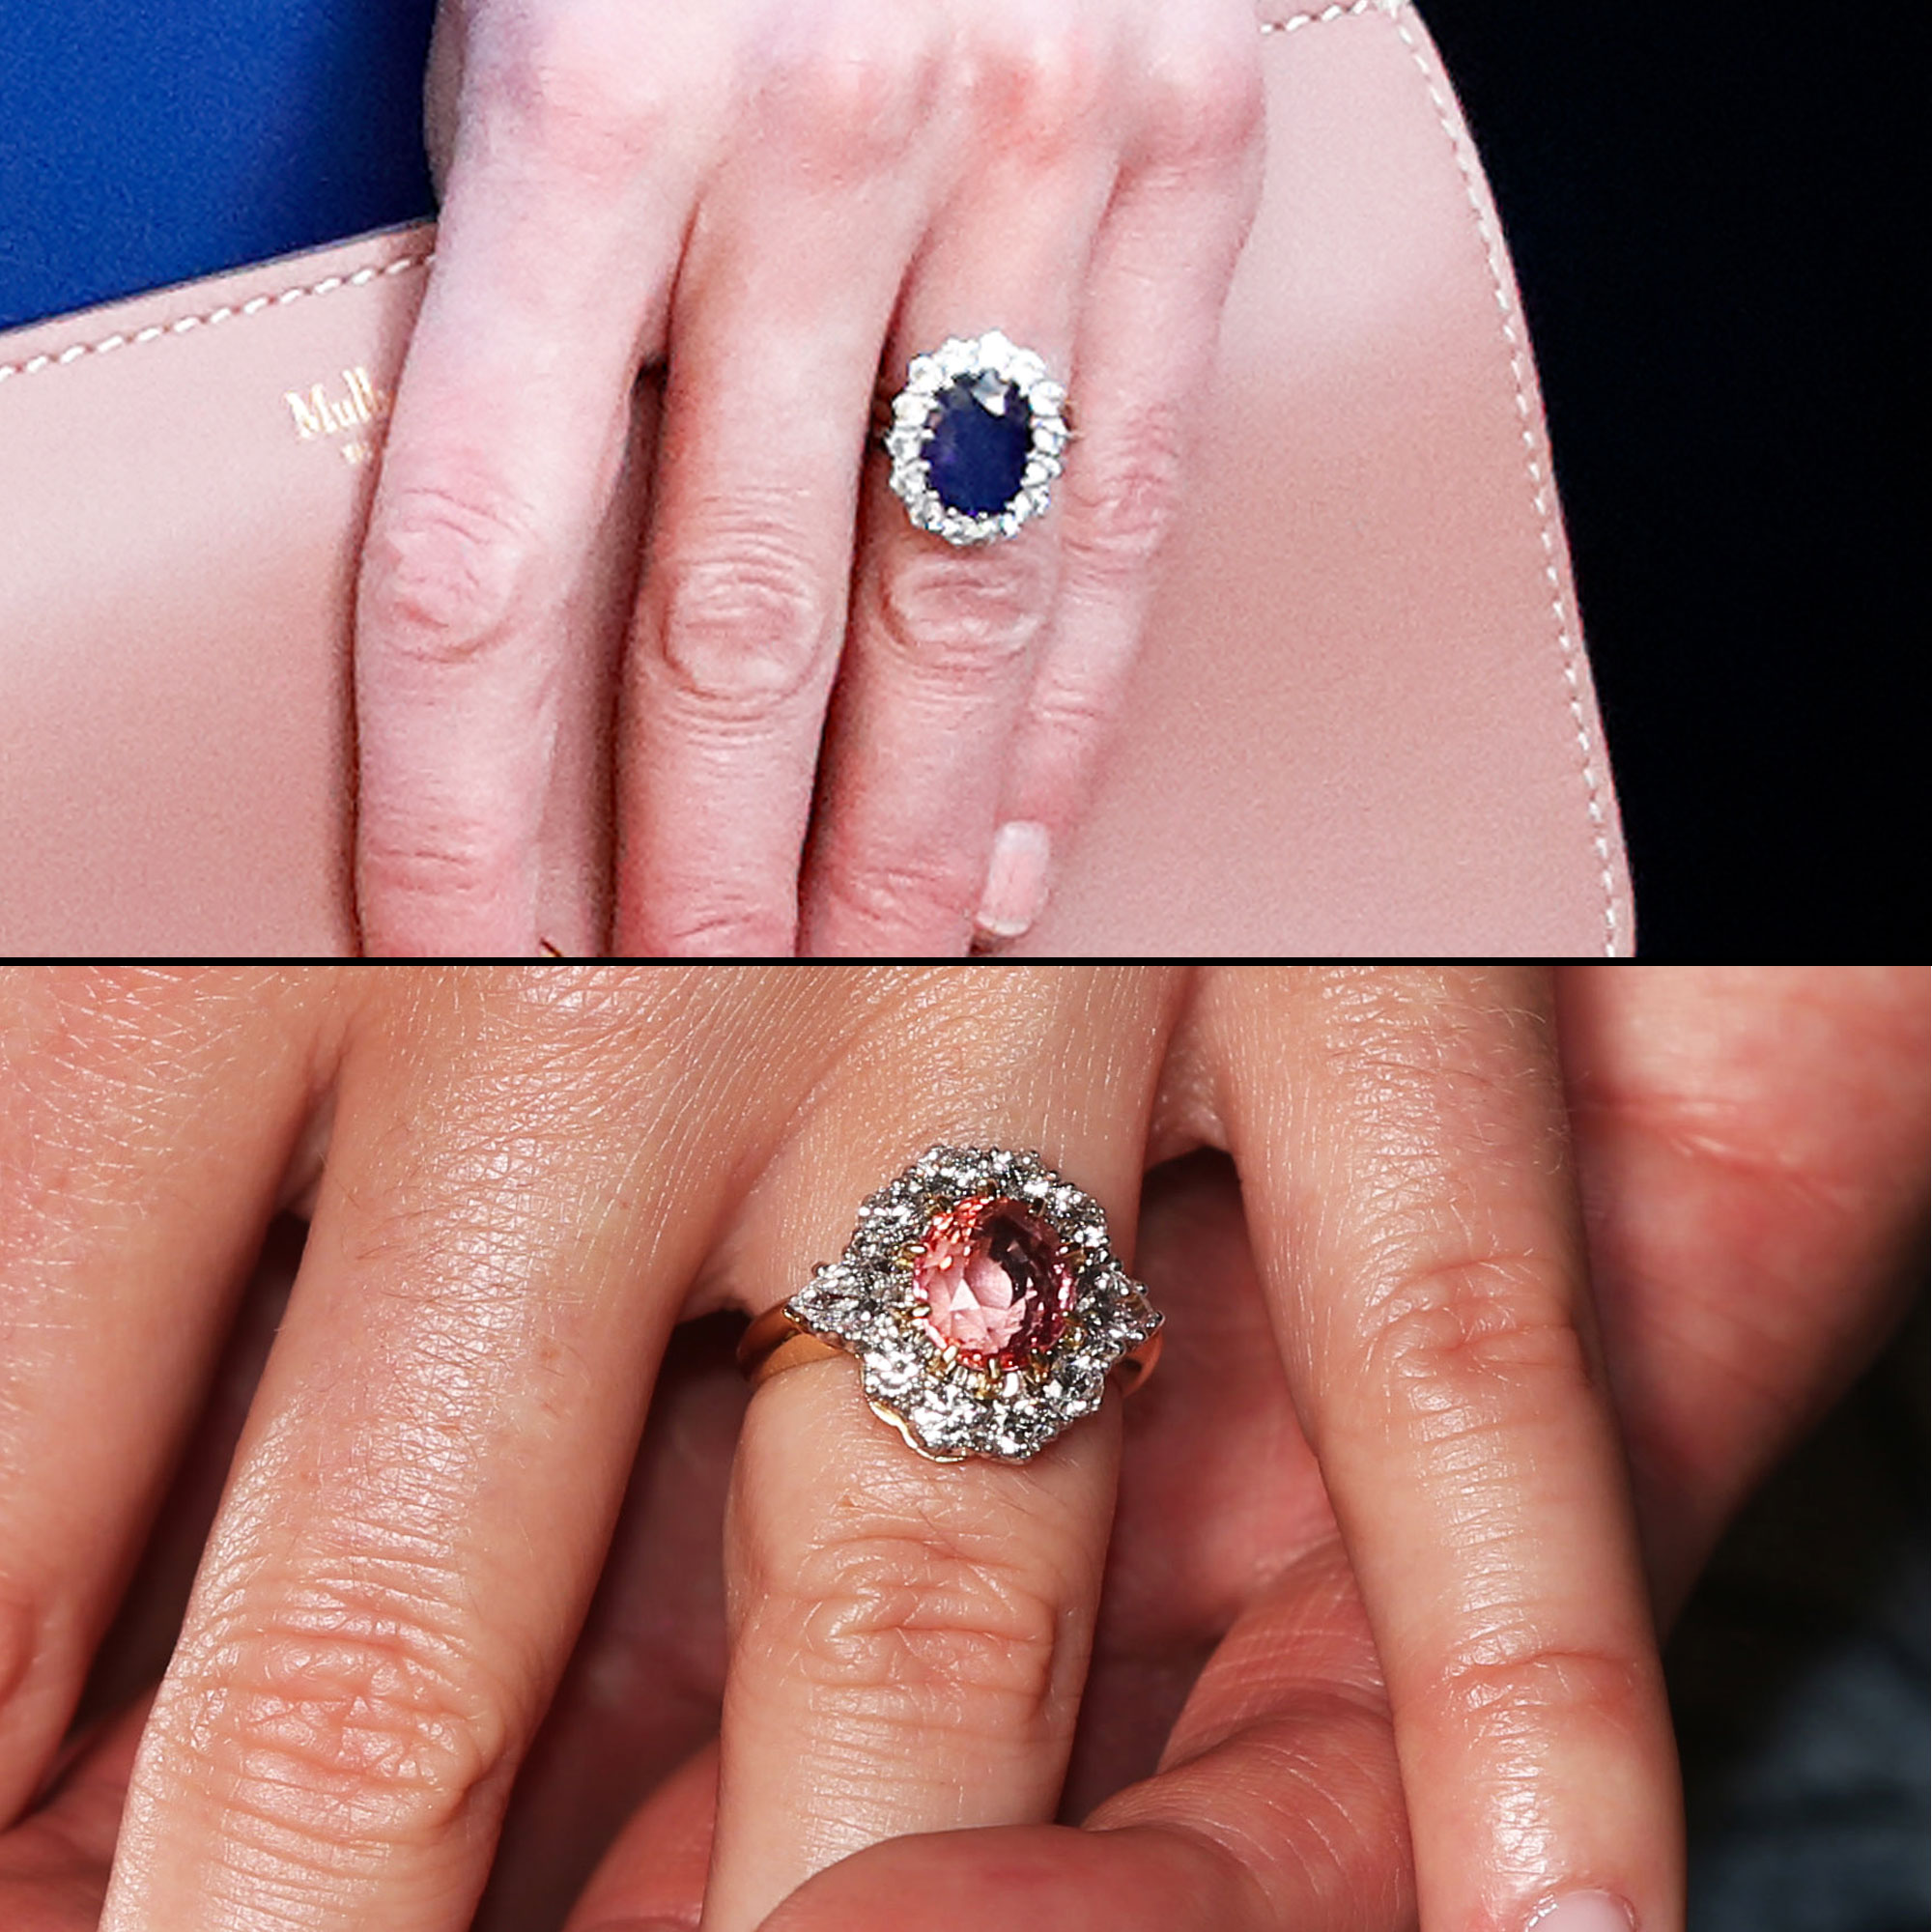 Princess Diana's ring (now Kate's) worth nearly $500K